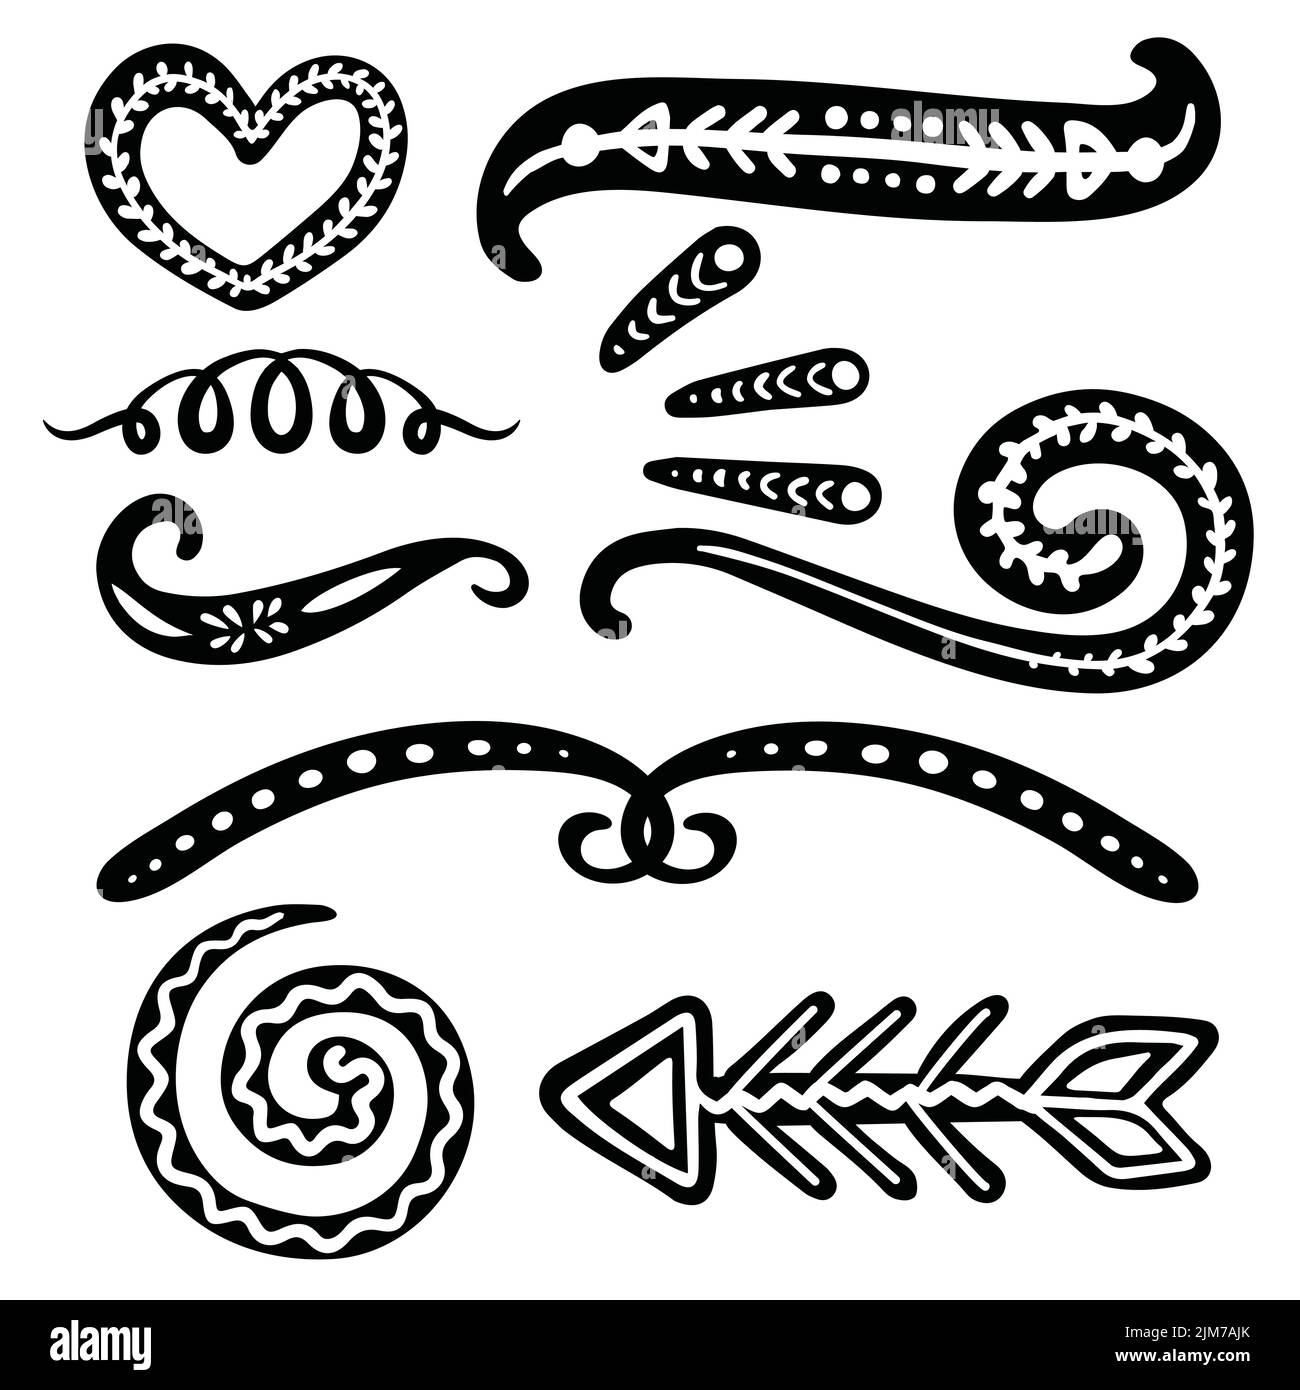 Swirls & Swooshes: Artistic Designs for a Relaxing Coloring